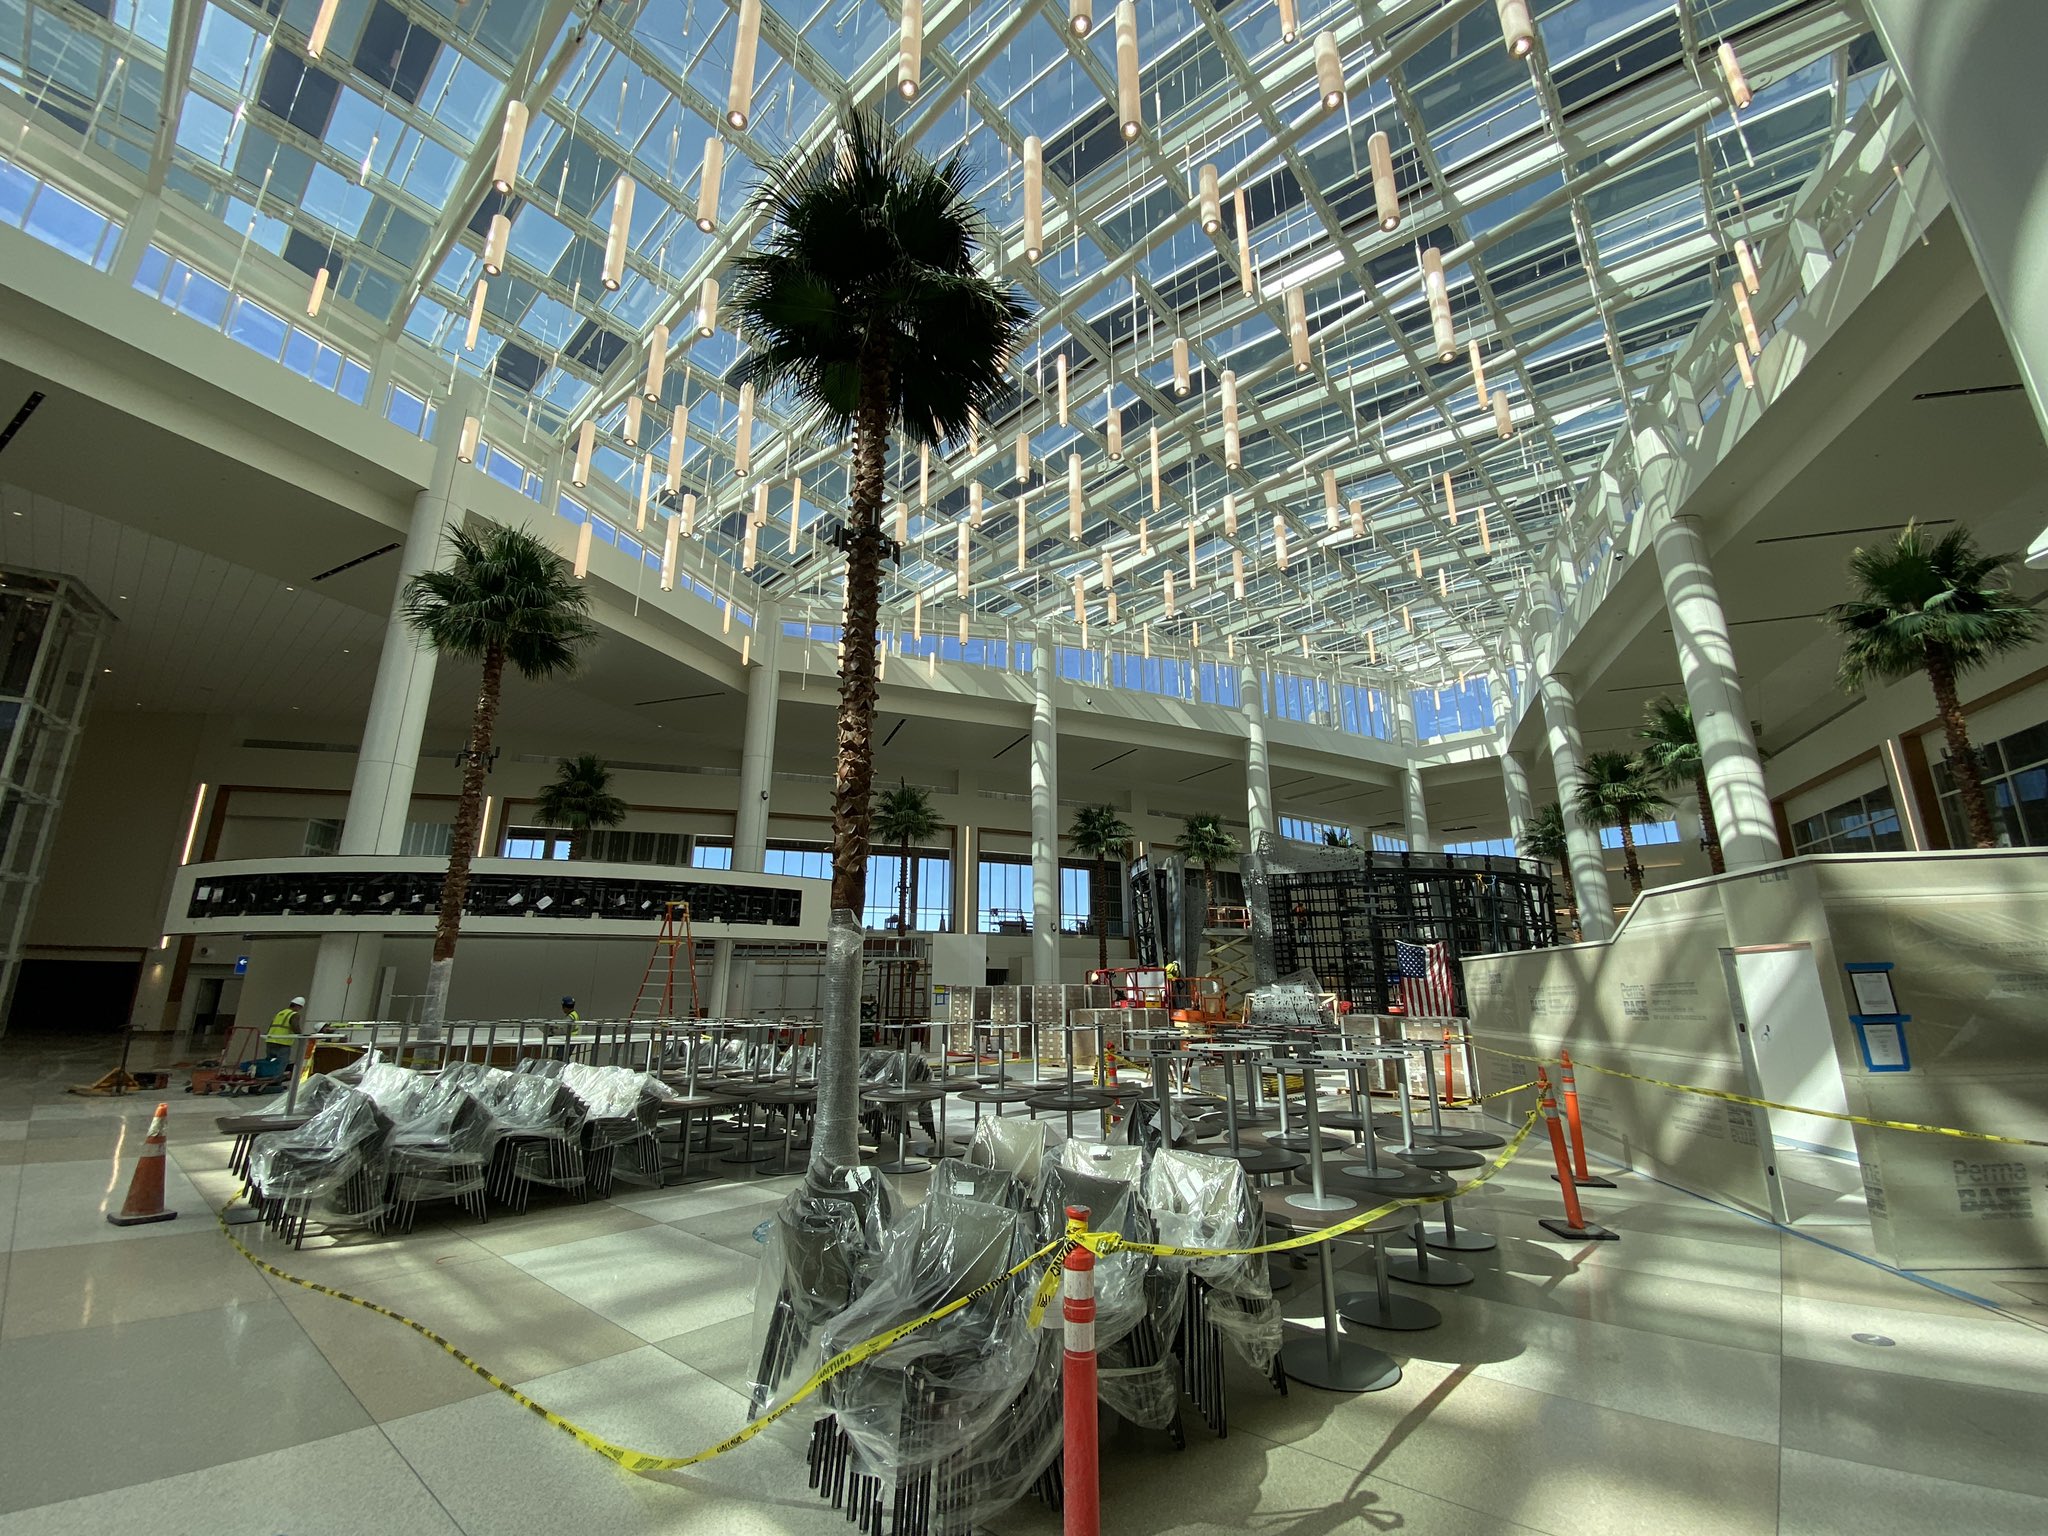 OVER 24 Food Options Coming to the Orlando Airport's NEW Terminal